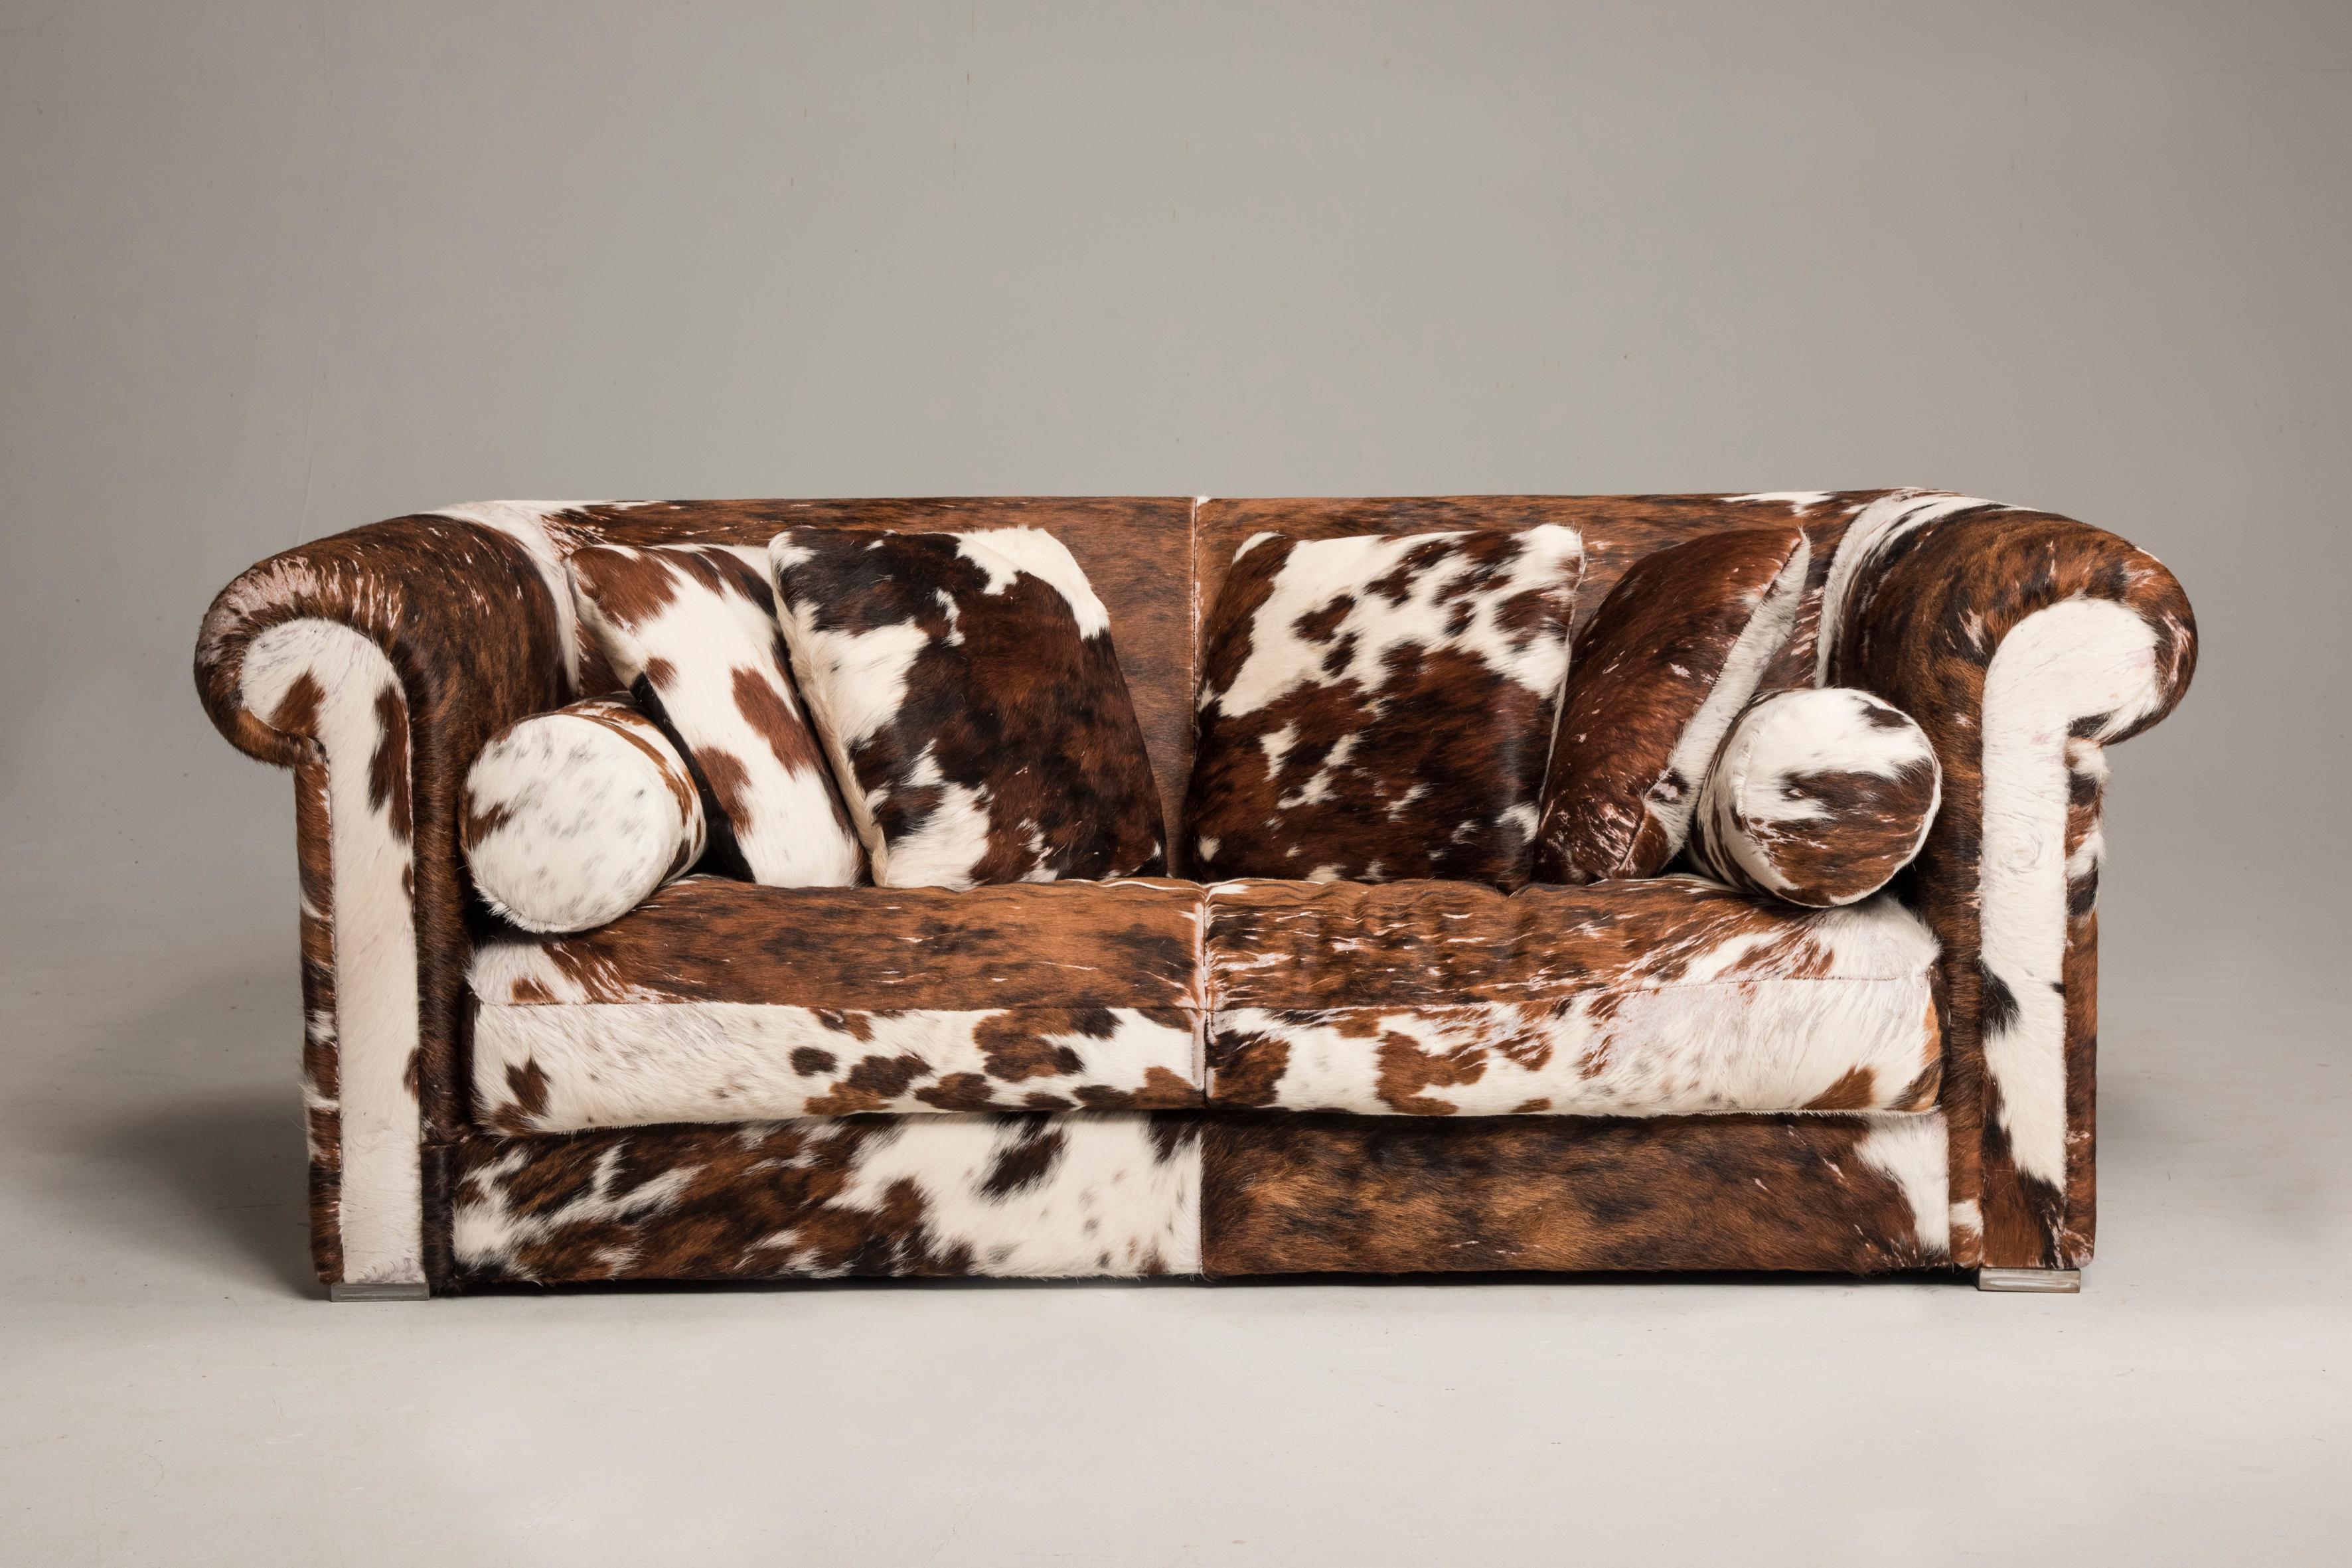 Post-Modern Baxter Brown and Dappled pony skin Leather Sofa with Pillows, Italy, 1990s For Sale